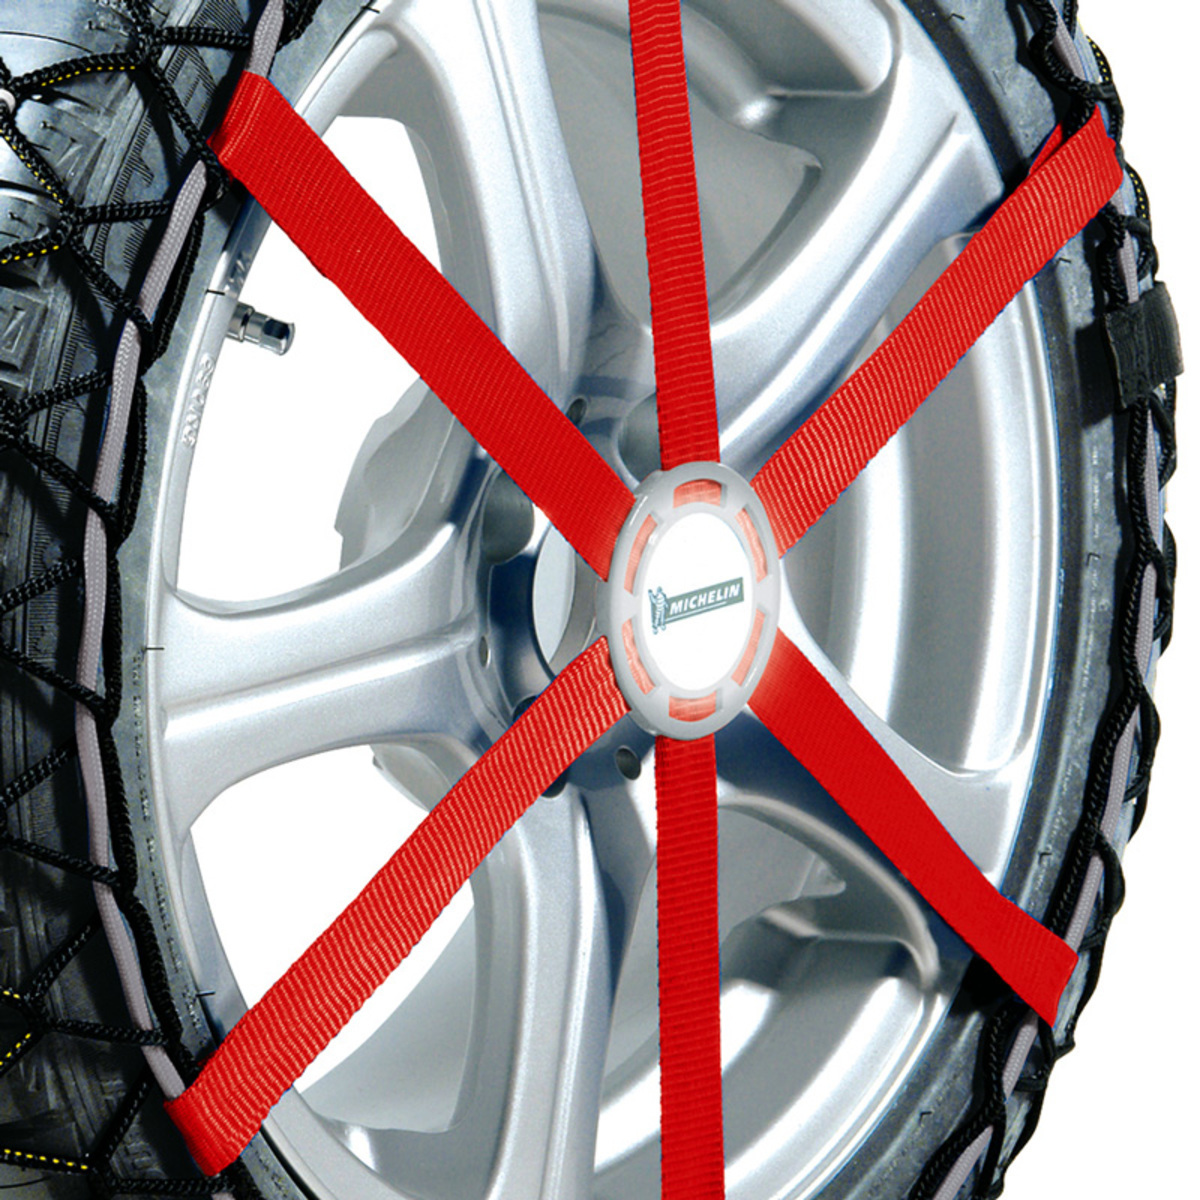 17" Michelin Easy Grip Composite Snow Chains for 4WD Cars with 225/65/17 Sized Tyres